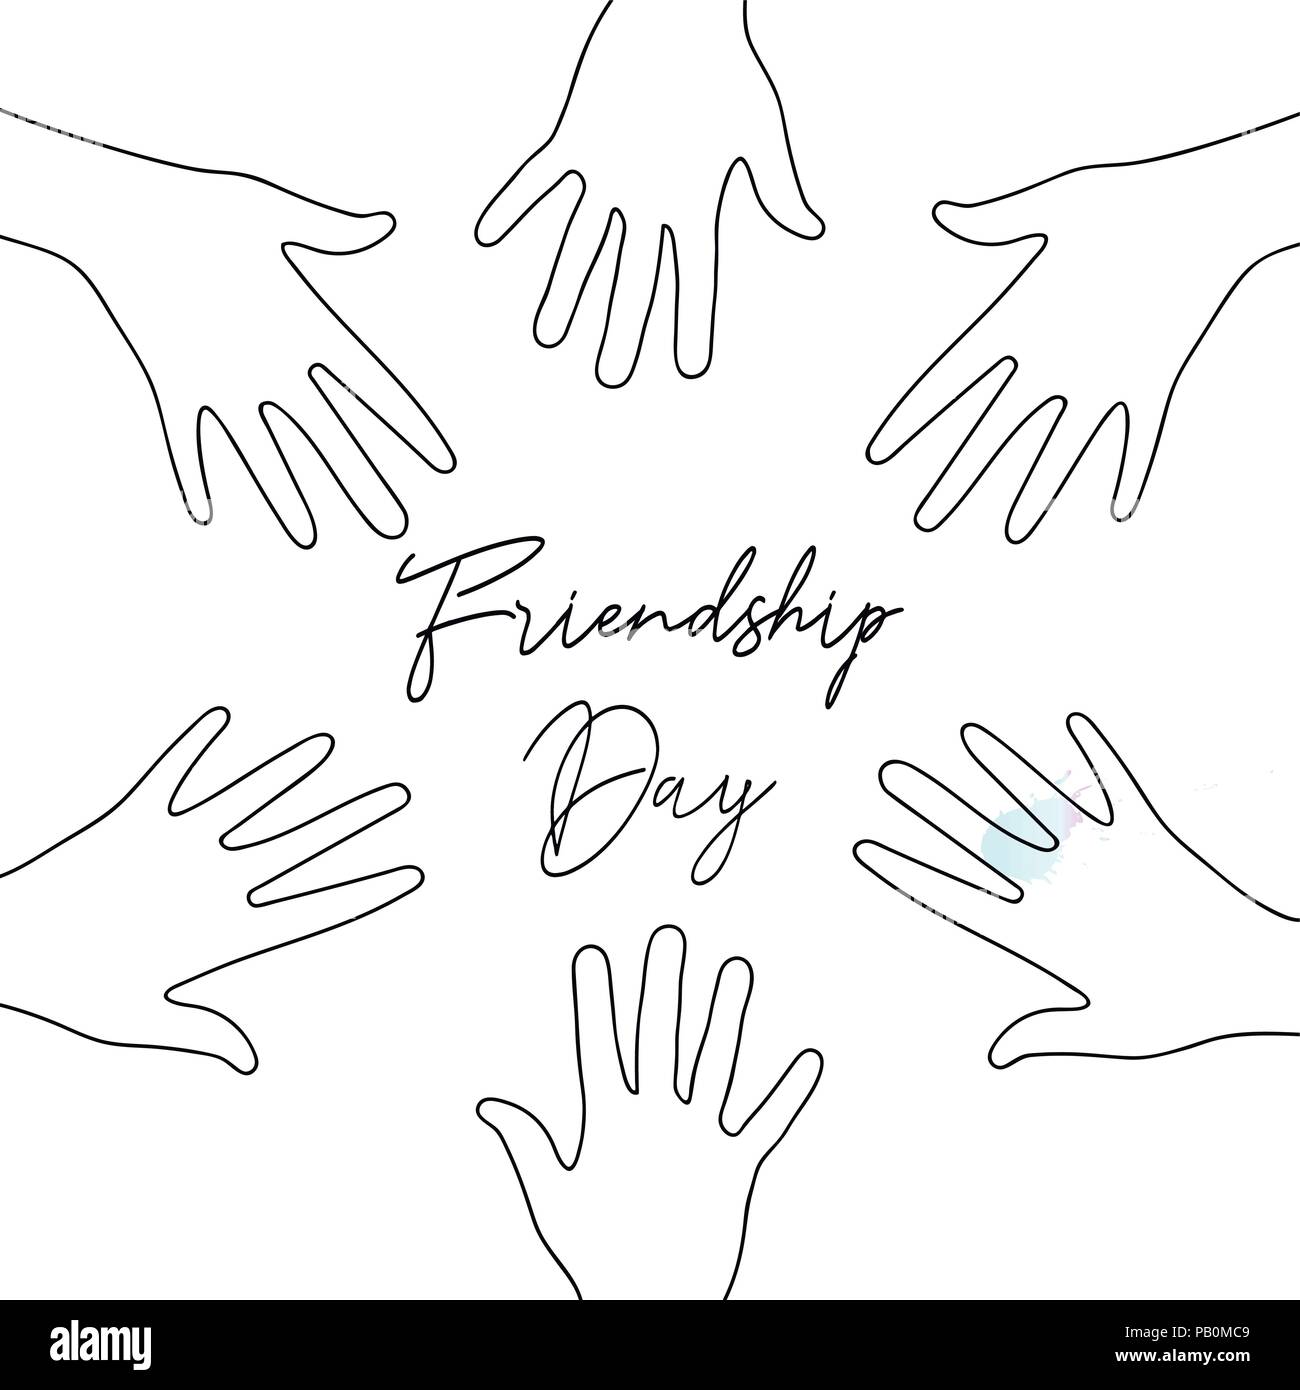 How To Friendship Day Drawing // Happy Friendship Day Drawing | Happy  friendship day, Happy friendship, Friendship day special